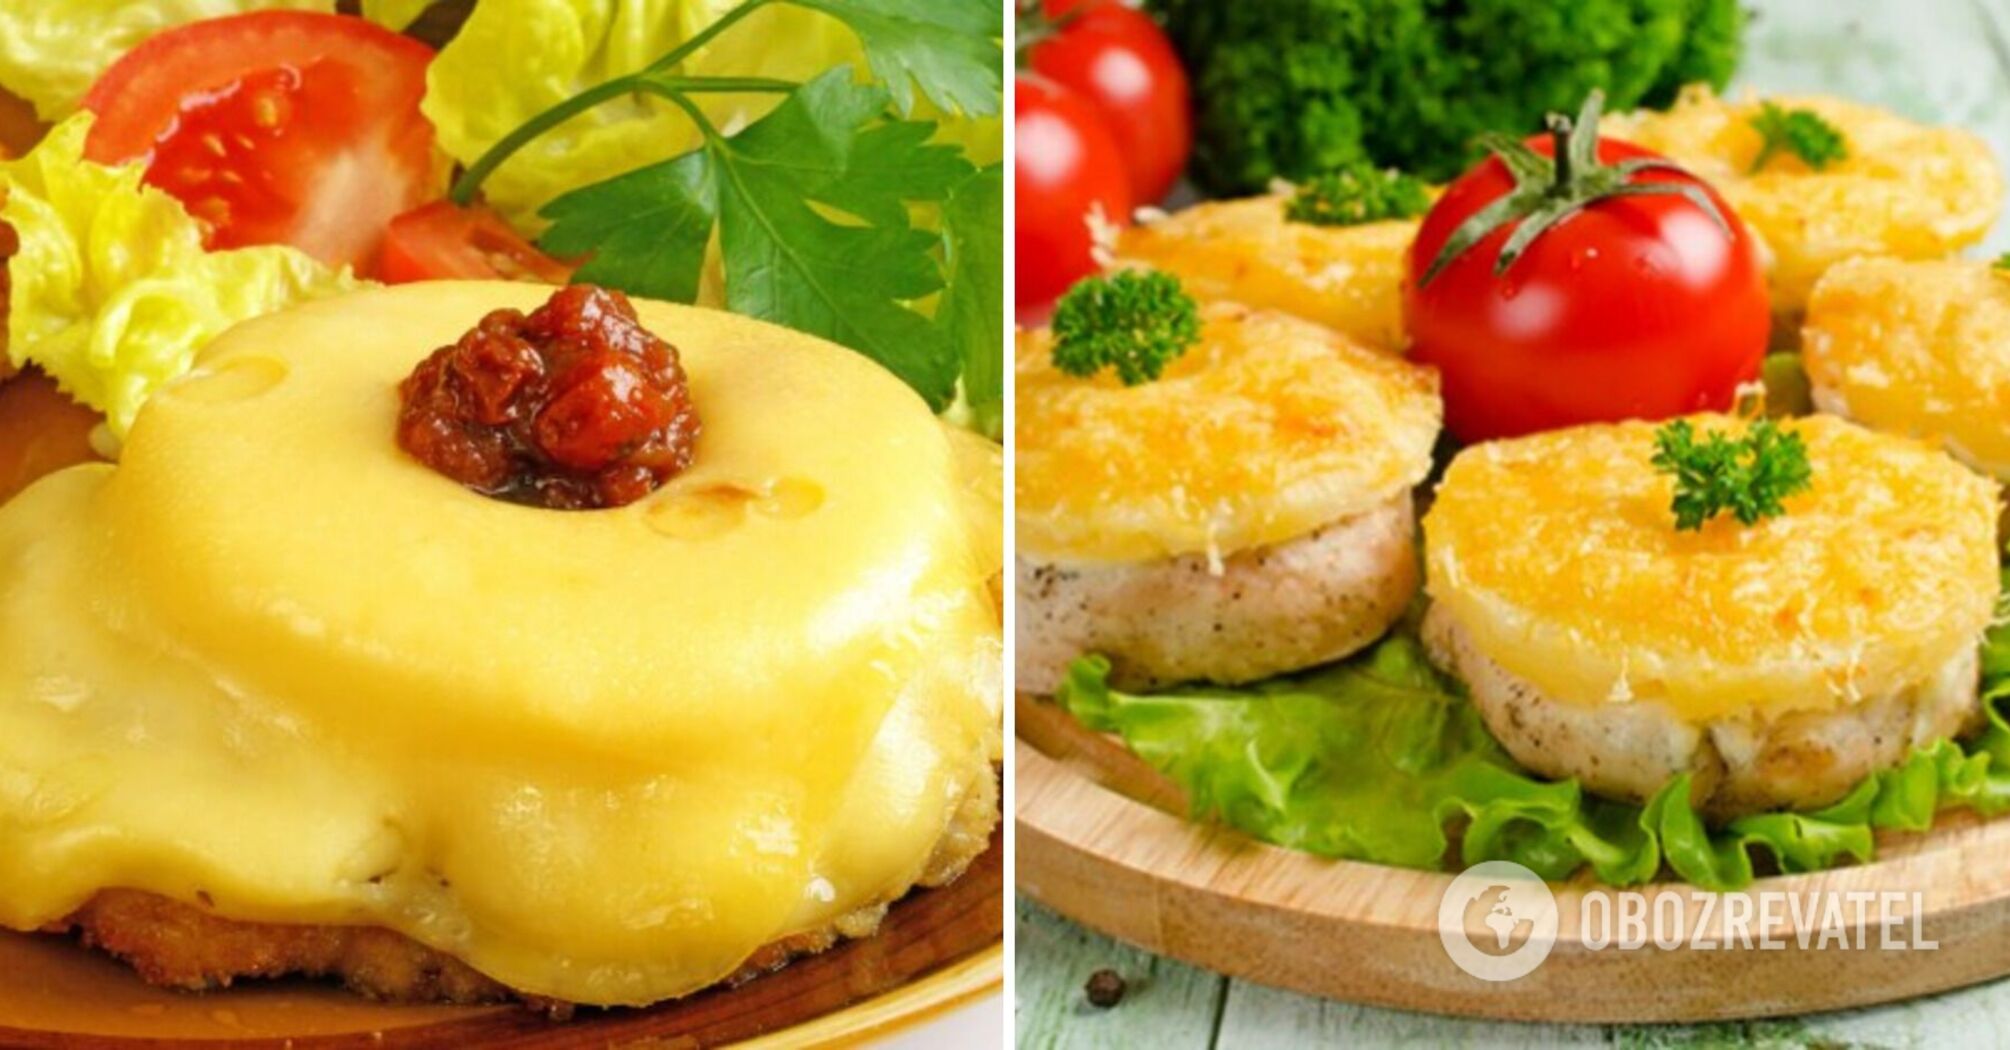 Juicy meat medallions with pineapple and cheese